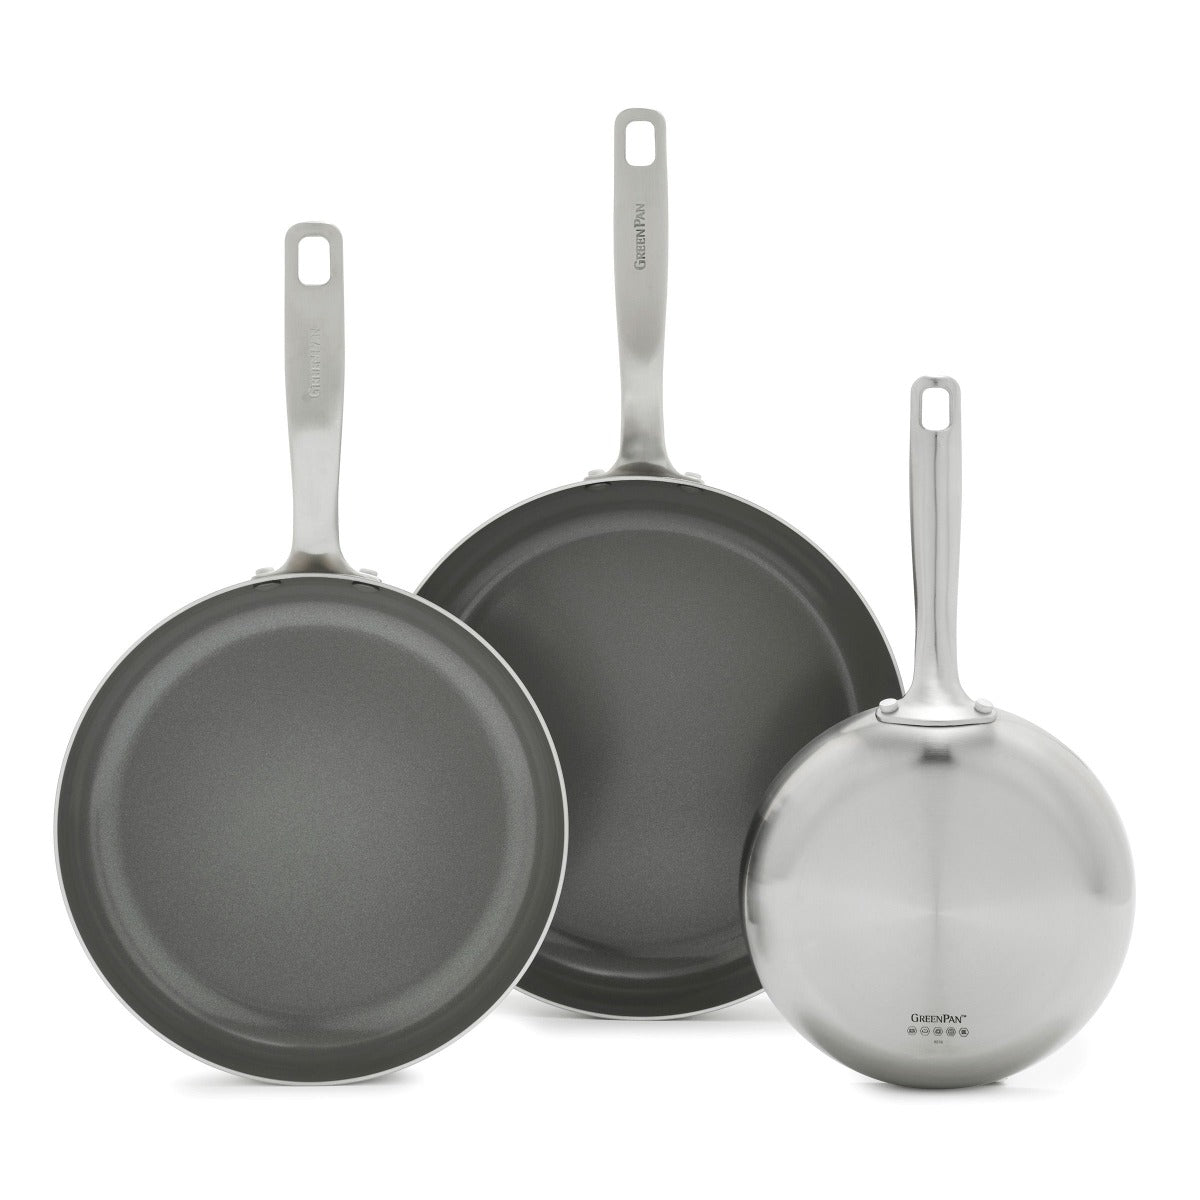 GreenPan Chatham 8 & 10 Tri-Ply Stainless Steel Nonstick Fry Pan Set, Cookware